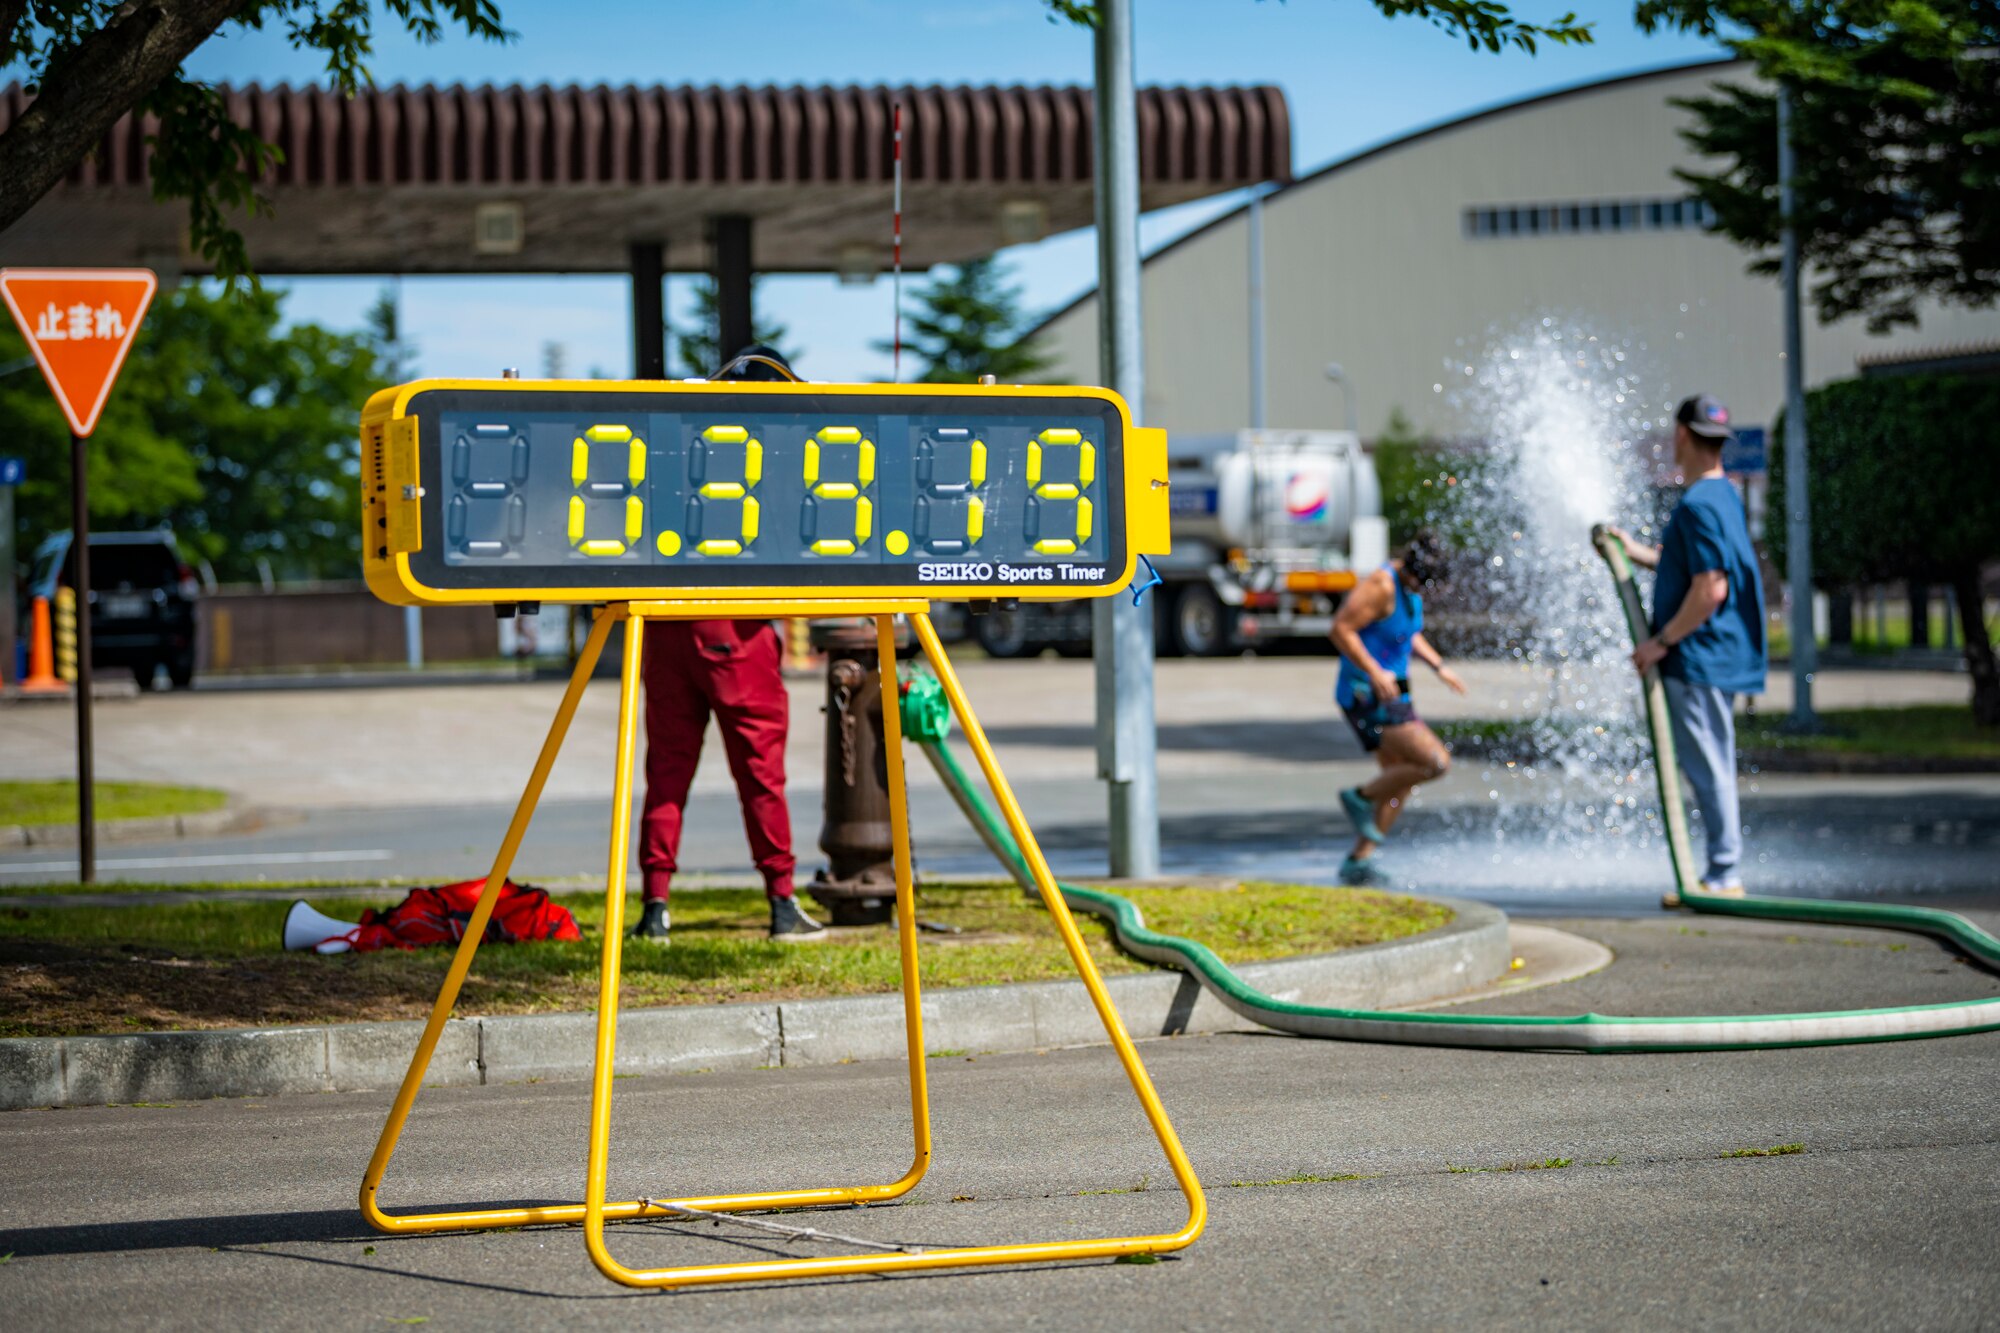 A yellow stop watch keeps track of time while runners cross the finish line in the background.